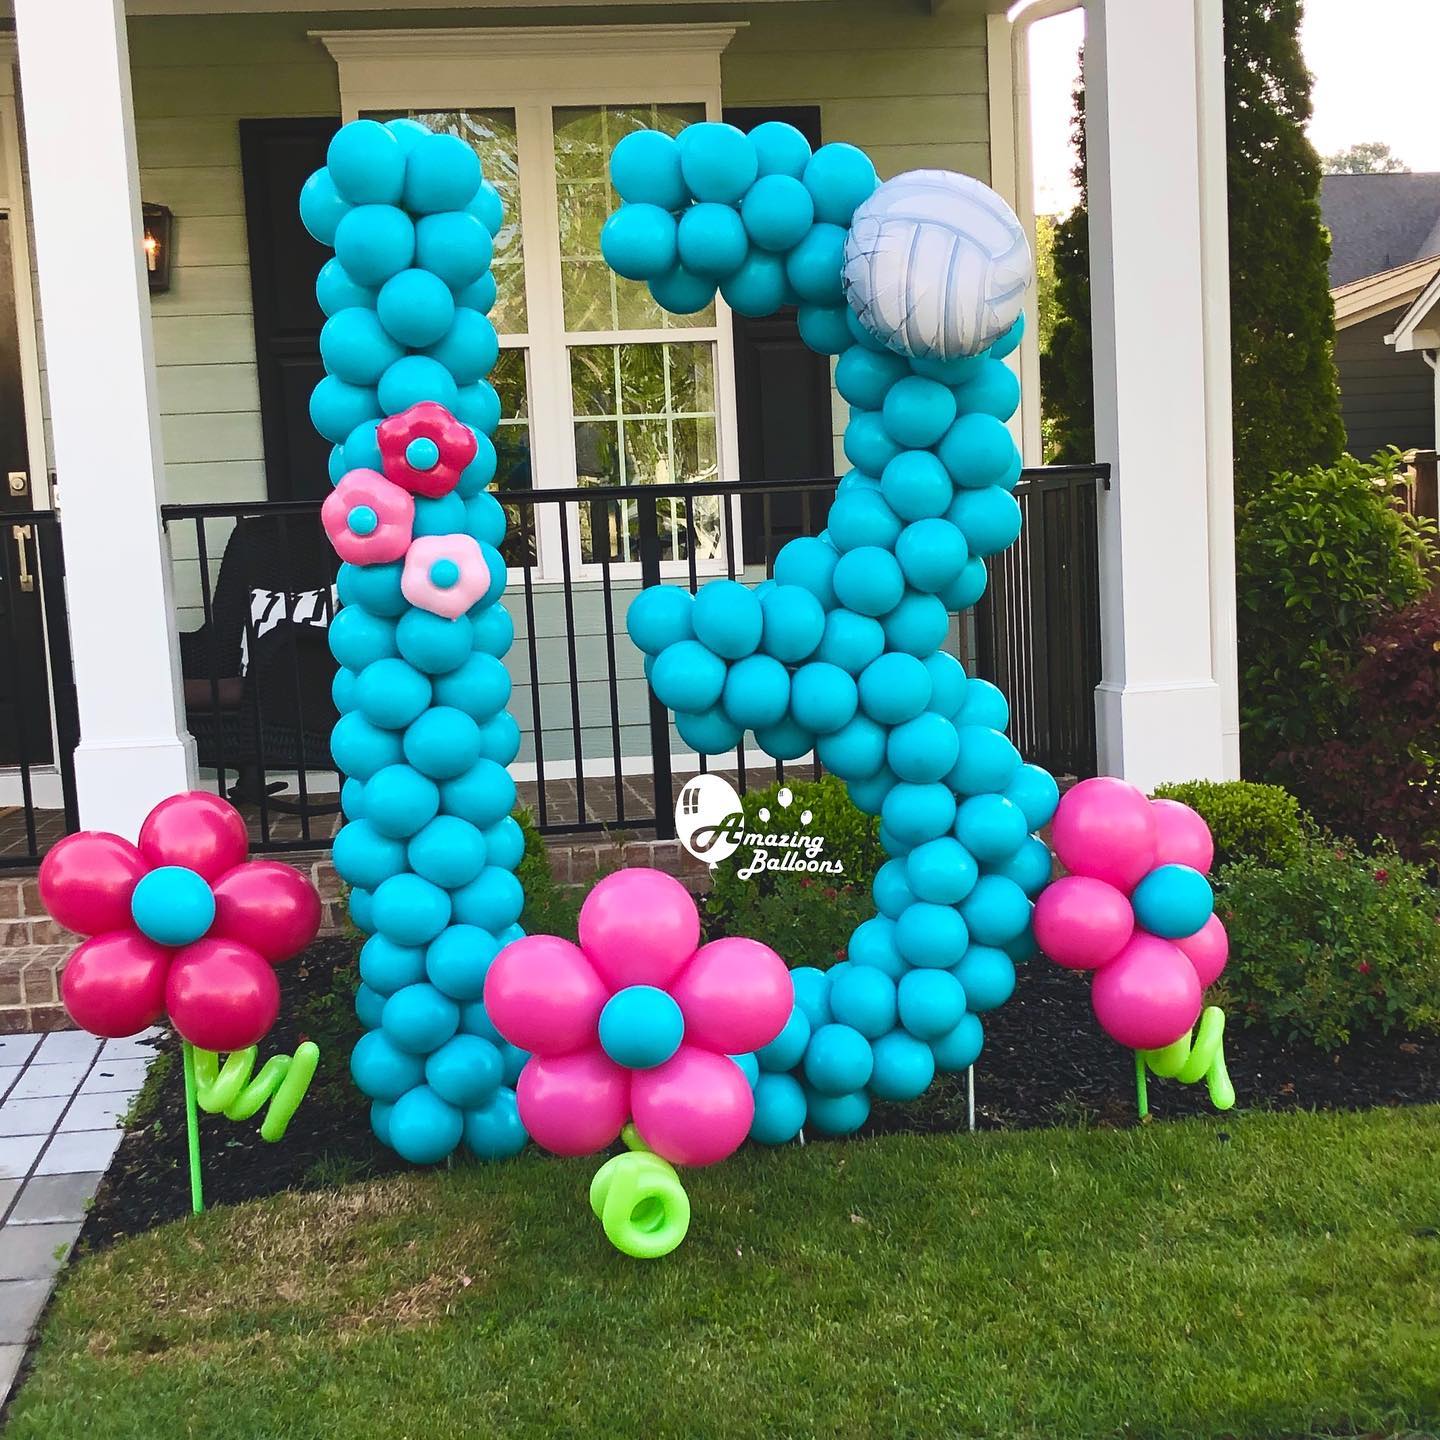 Large 13 year old balloon decor for front yard